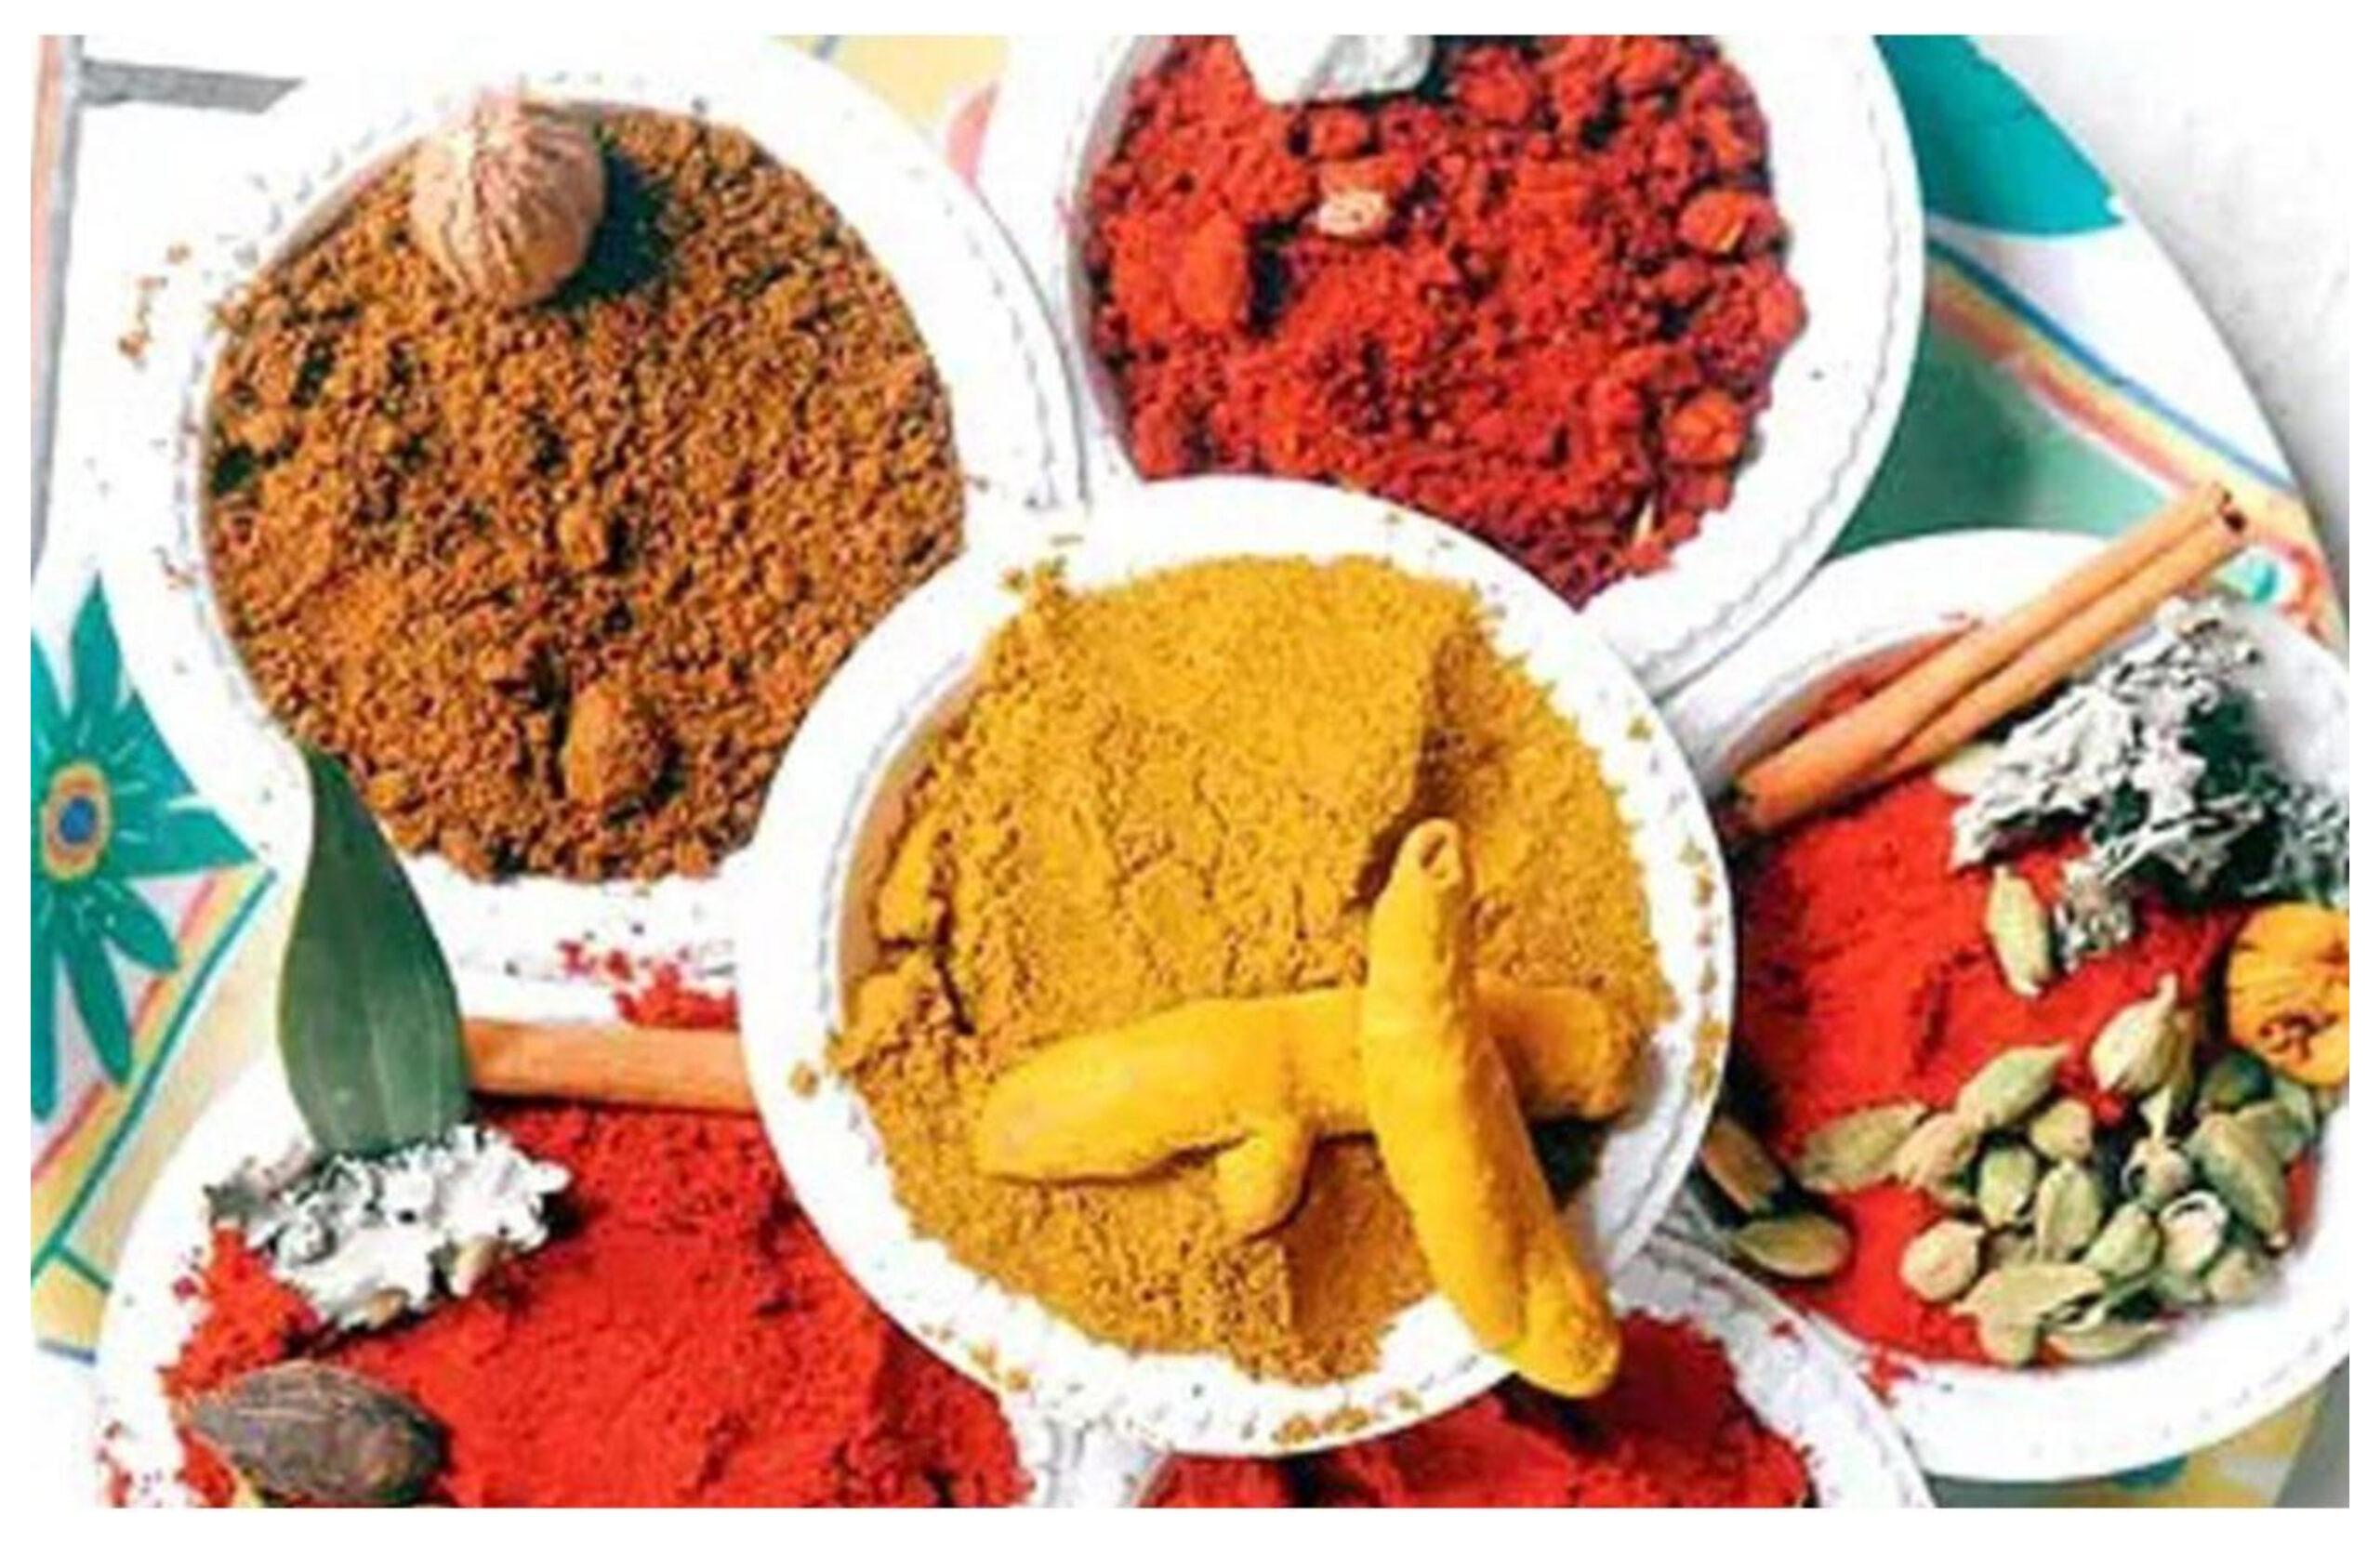 Spices: After the ban on Indian spices, the Indian government took a big decision..